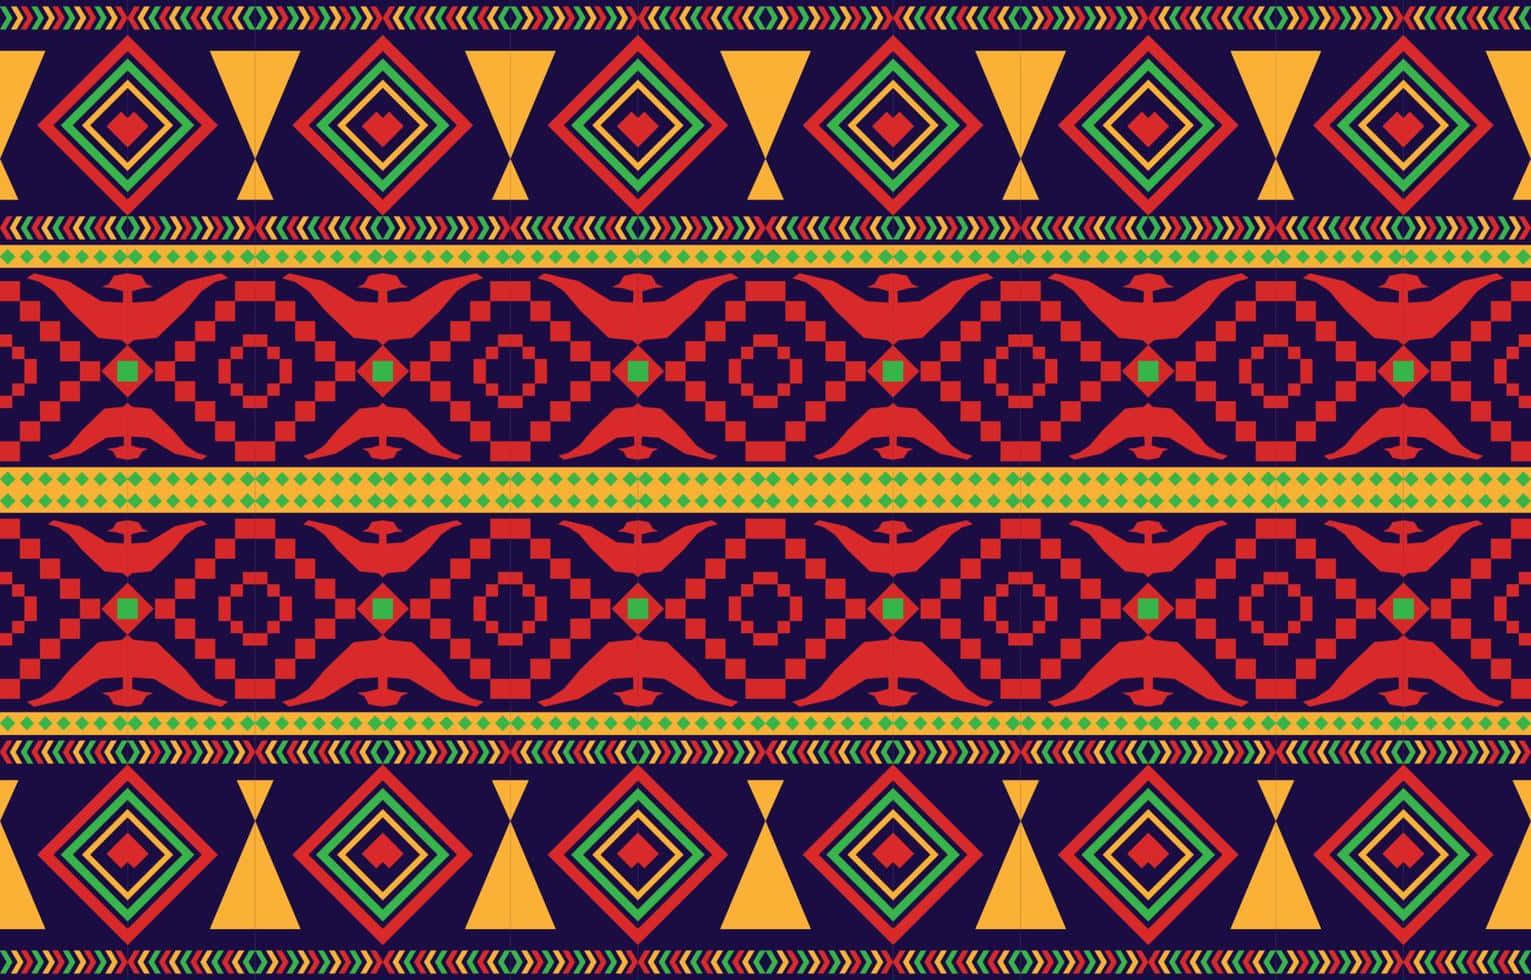 A Colorful Tribal Pattern With Red, Yellow And Blue Colors